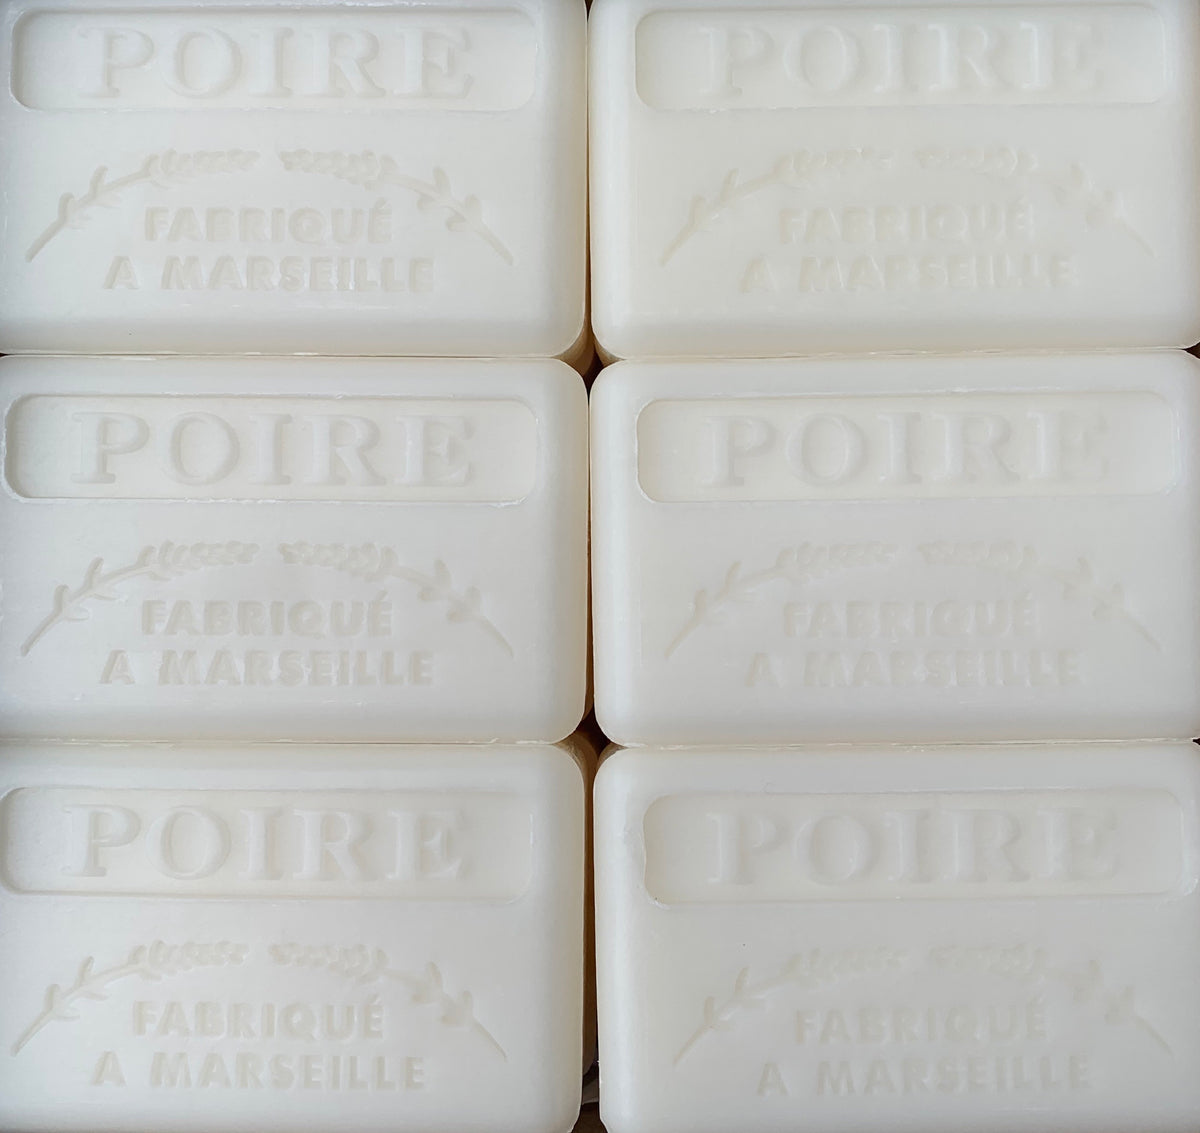 french pear poire soap bar